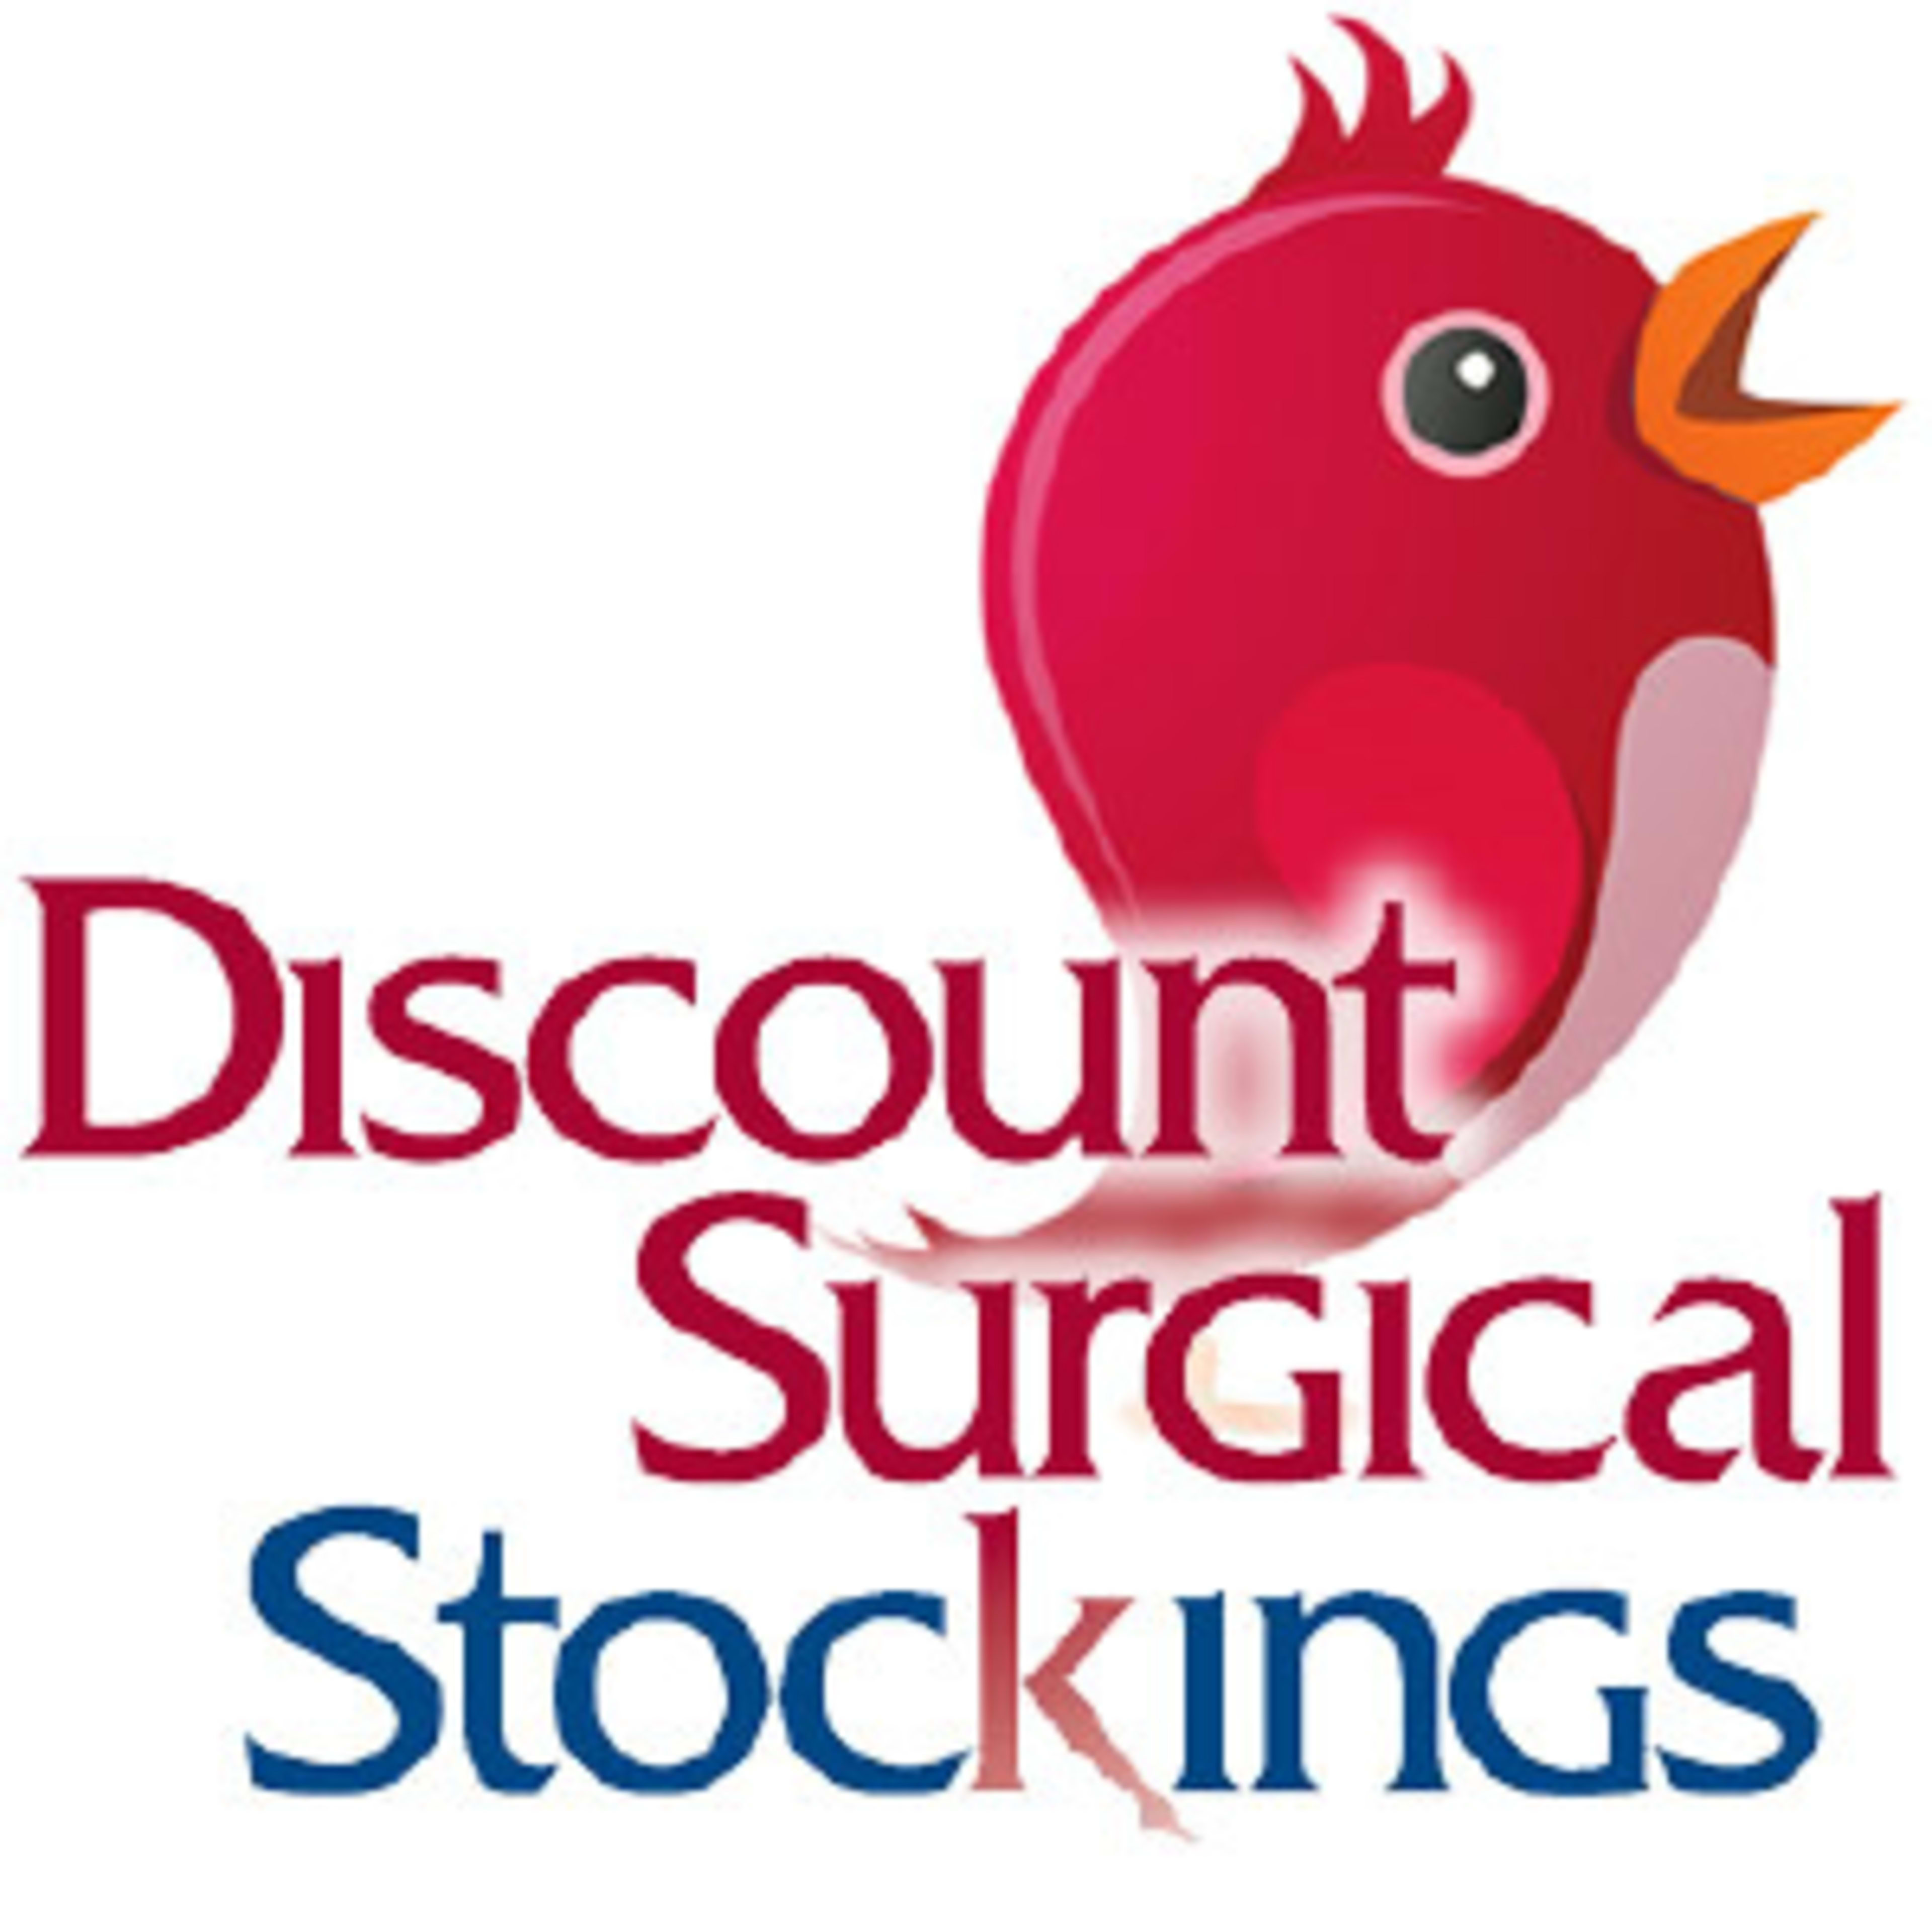 Discount Surgical Stockings Code